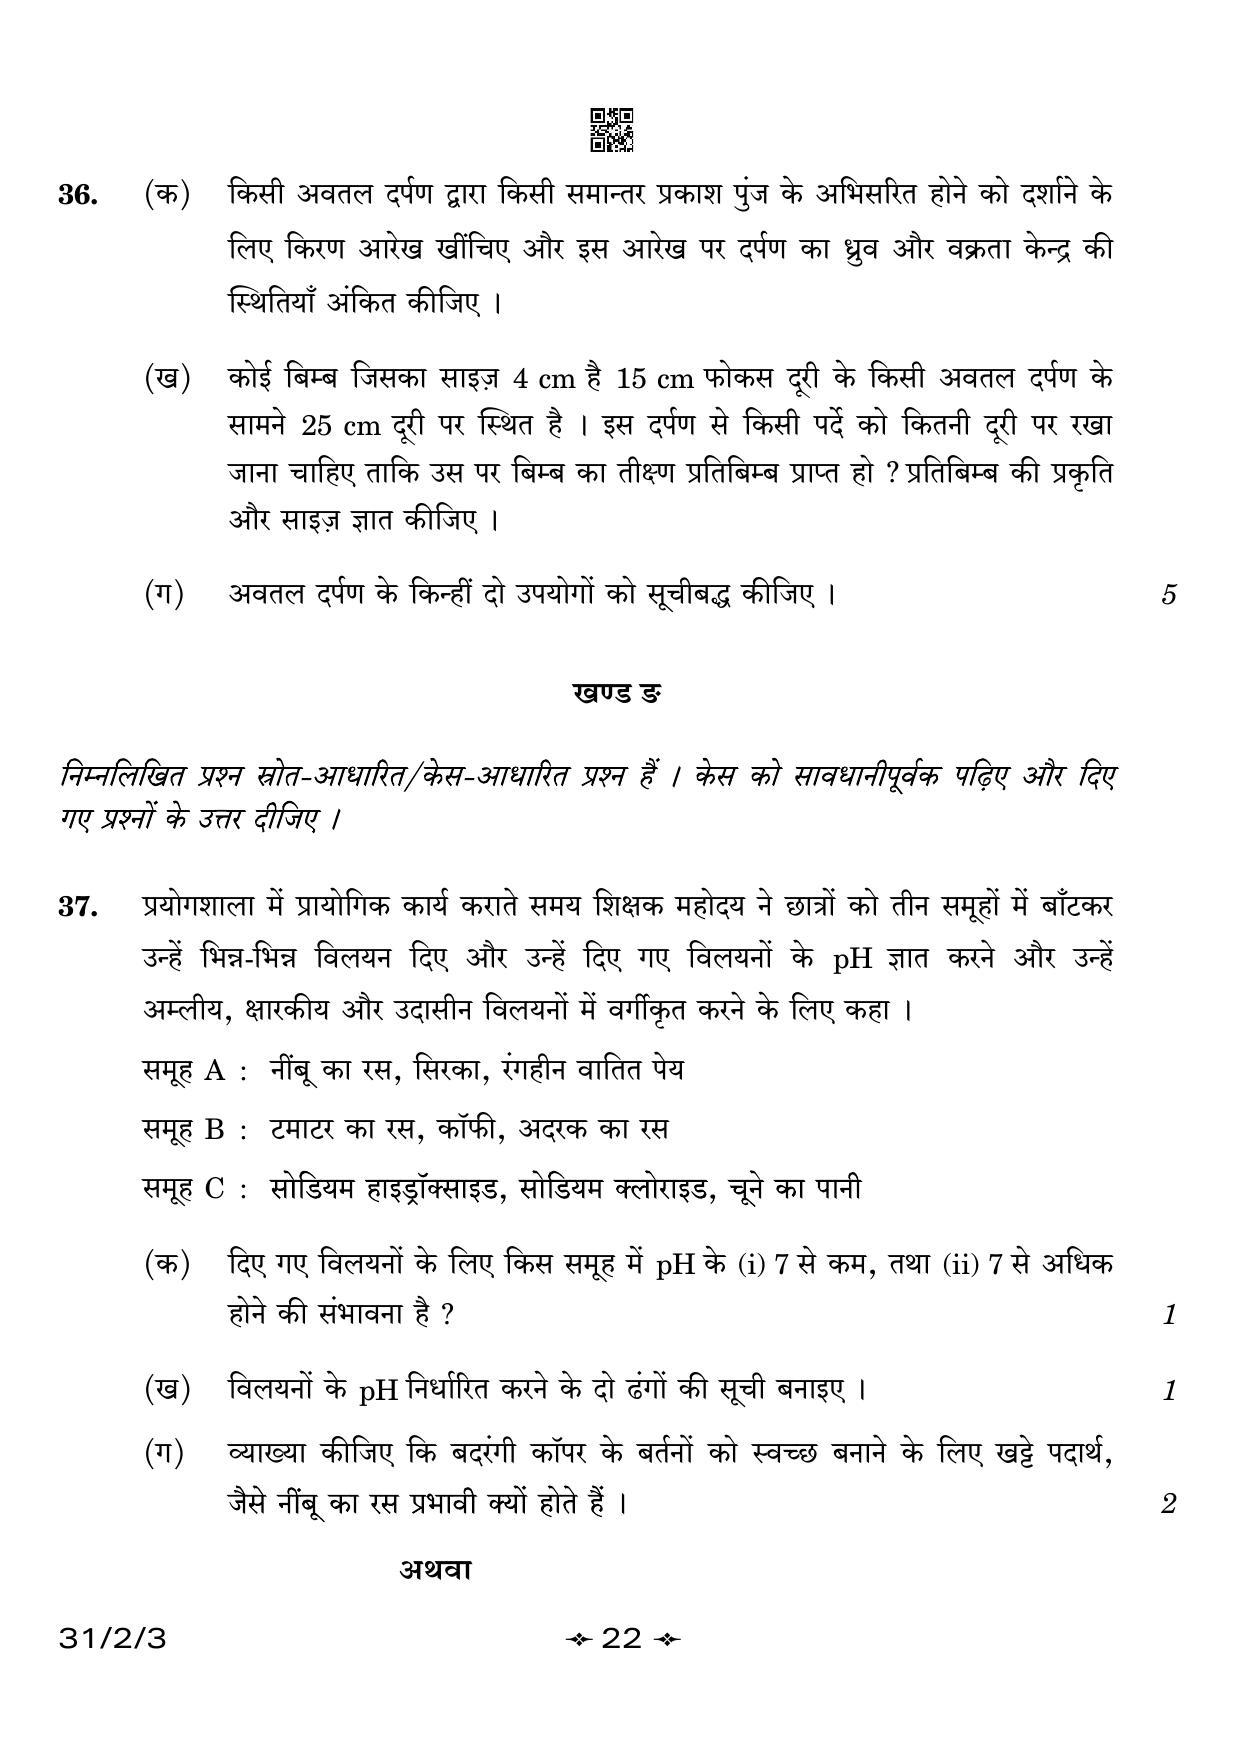 CBSE Class 10 31-2-3 Science 2023 Question Paper - Page 22